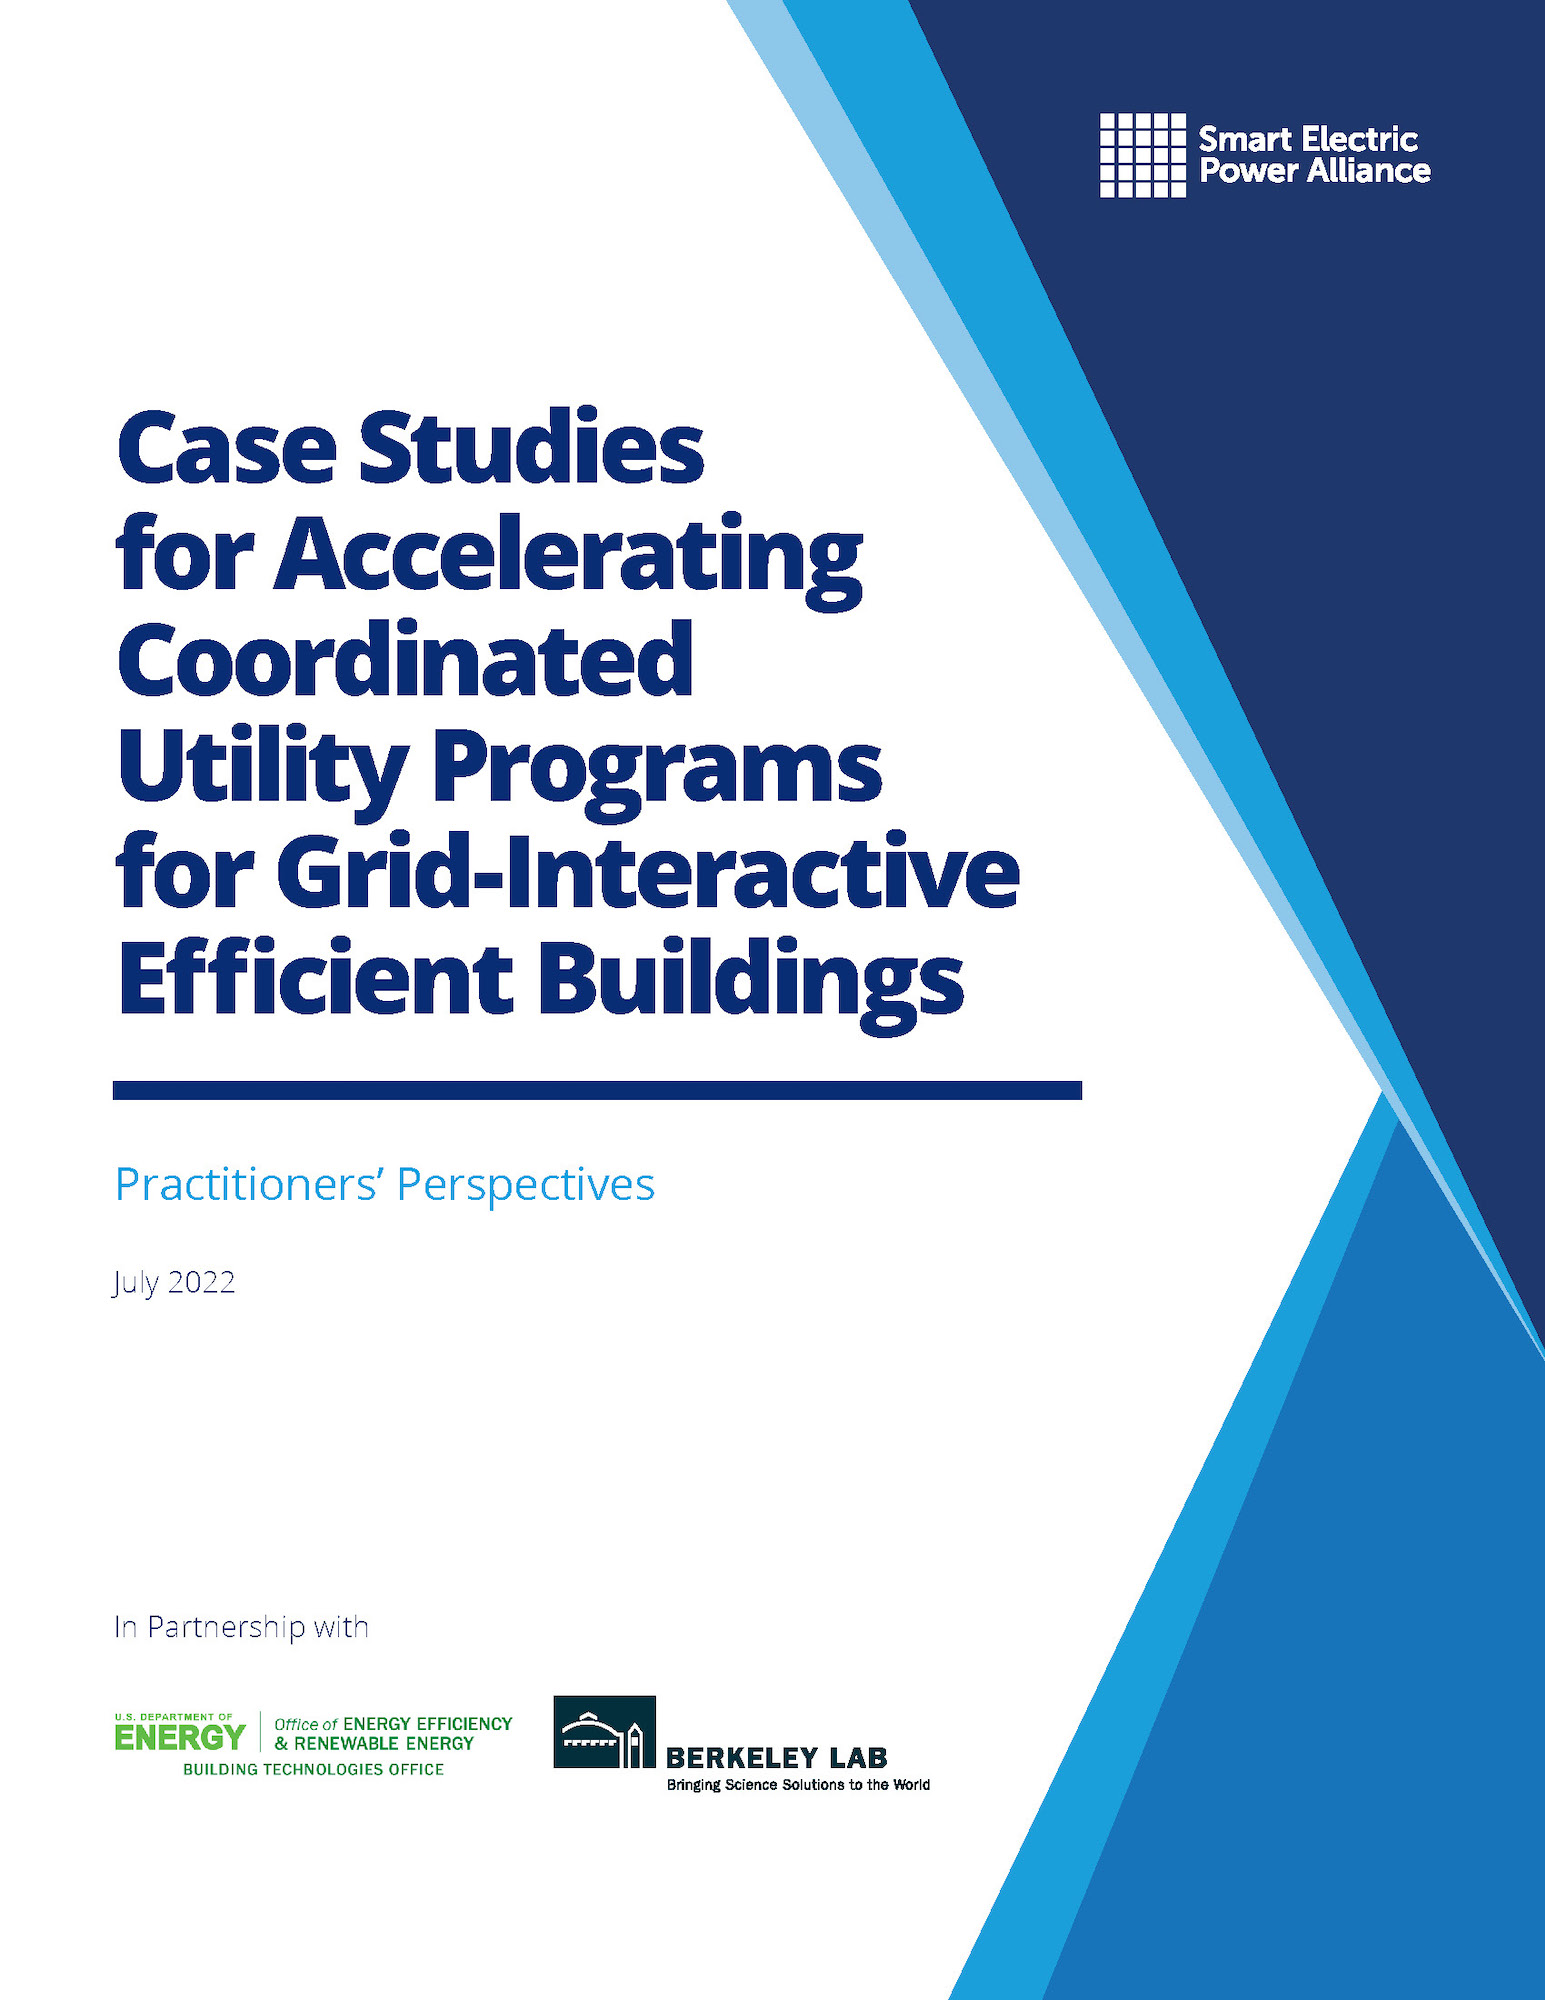 Case Studies for Accelerating Coordinated Utility Program for Grid-Interactive Efficient Buildings